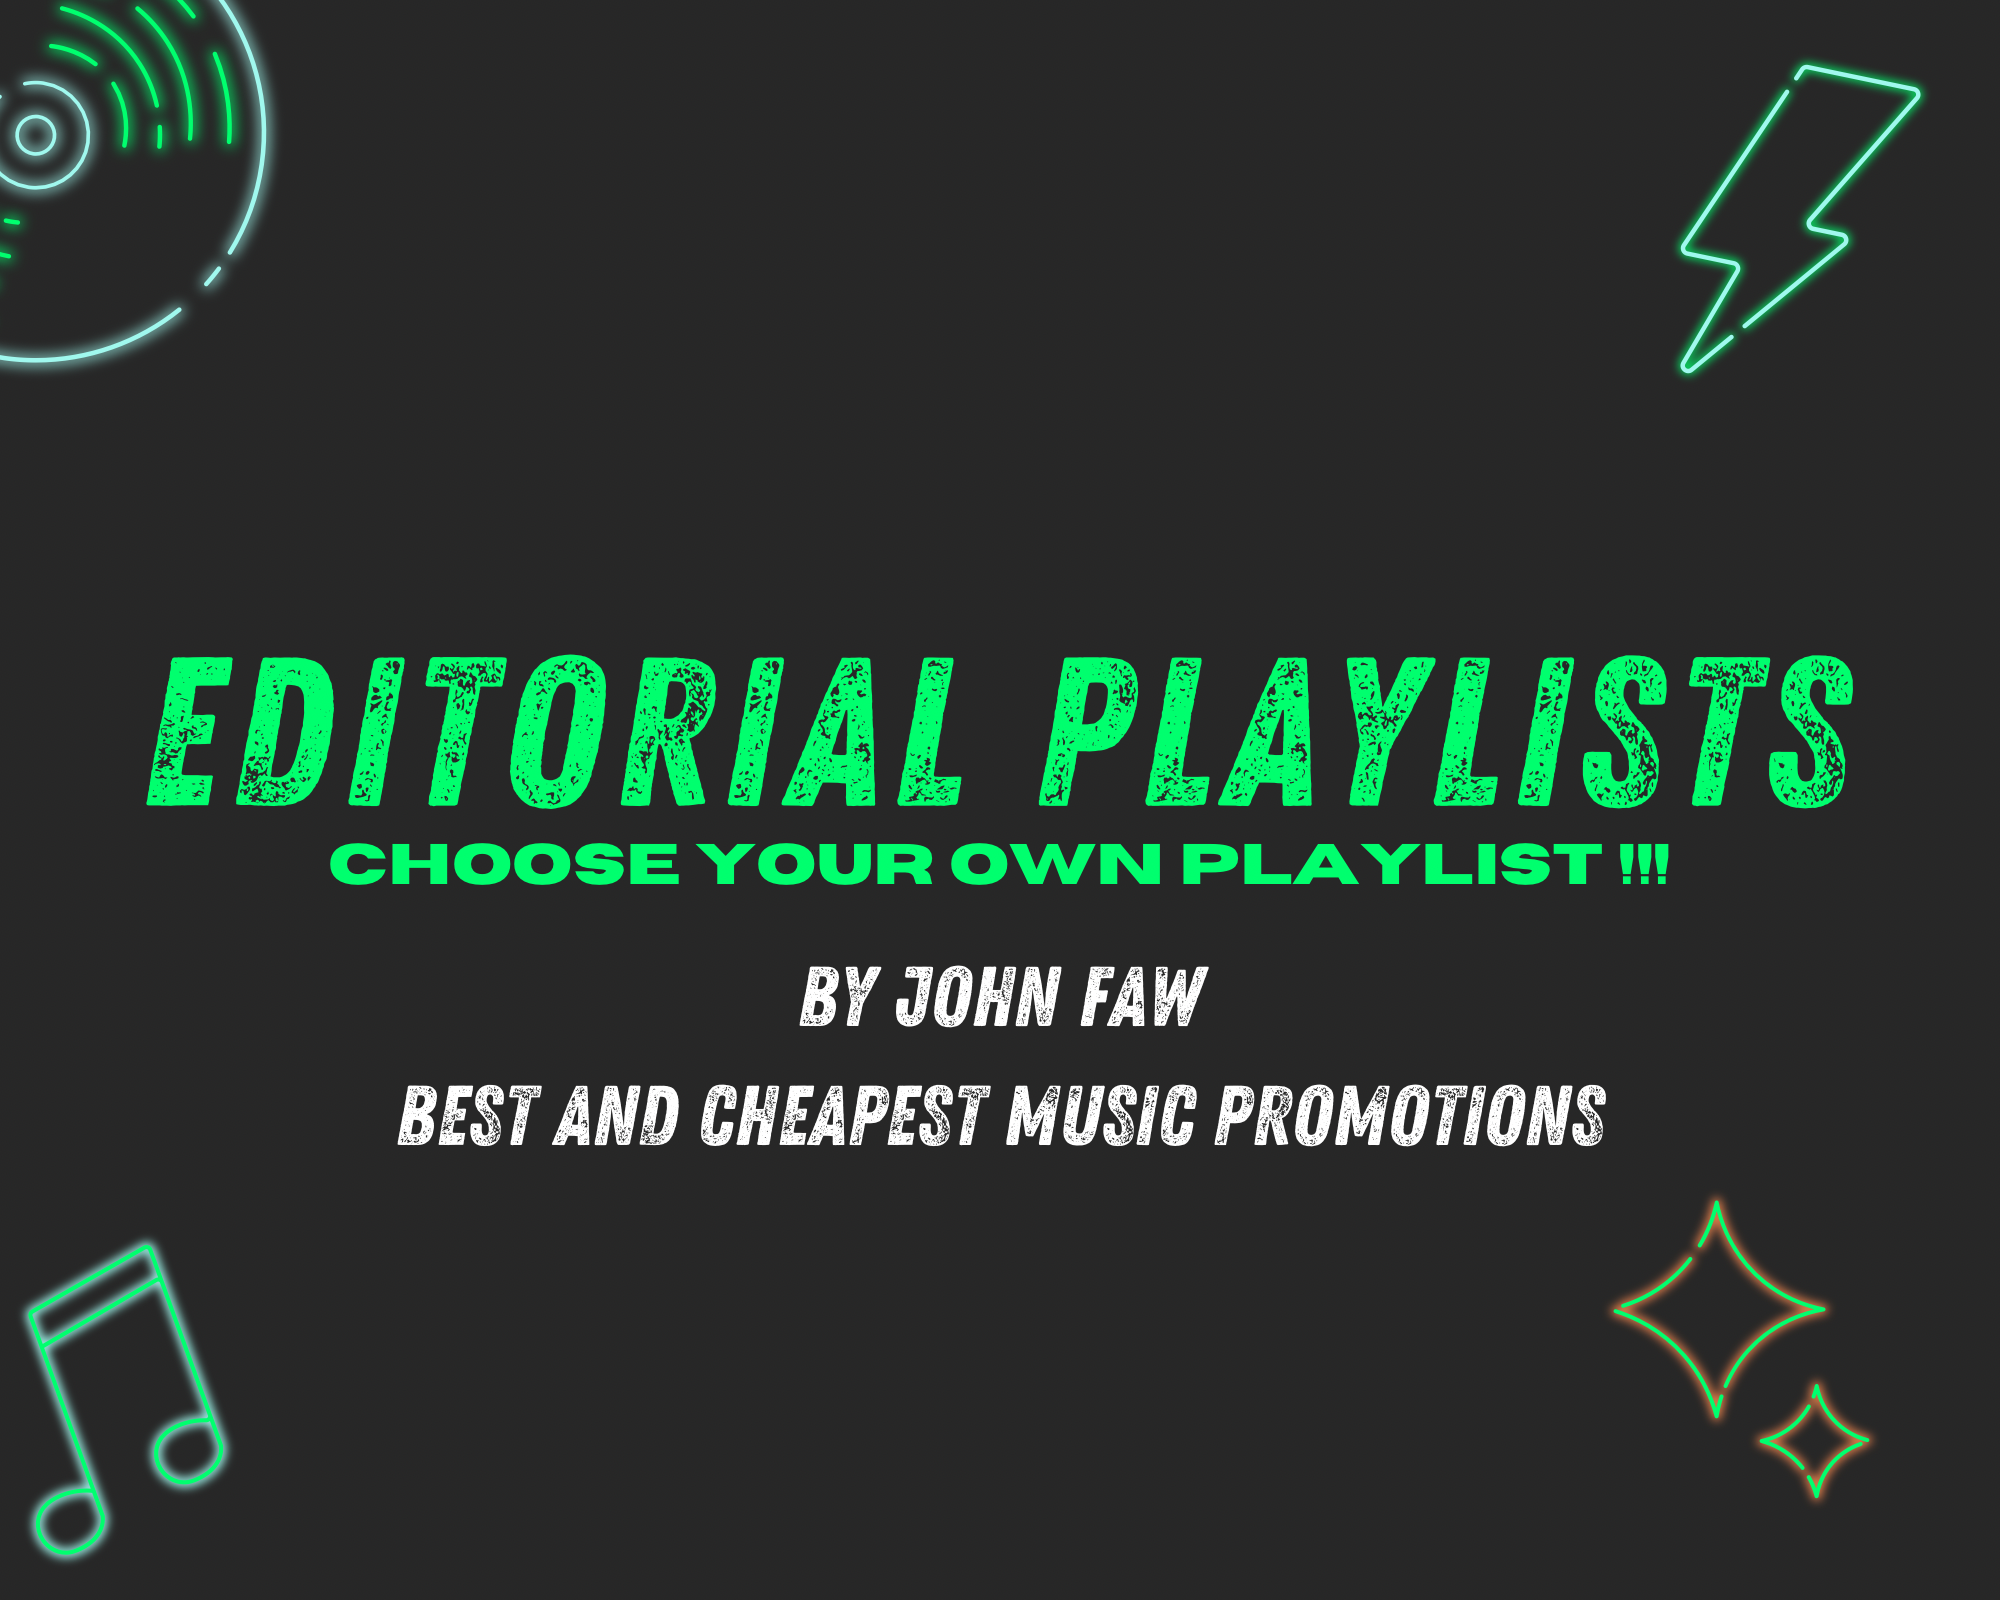 Editorial Playlists Campaign - PICK YOUR OWN PLAYLIST